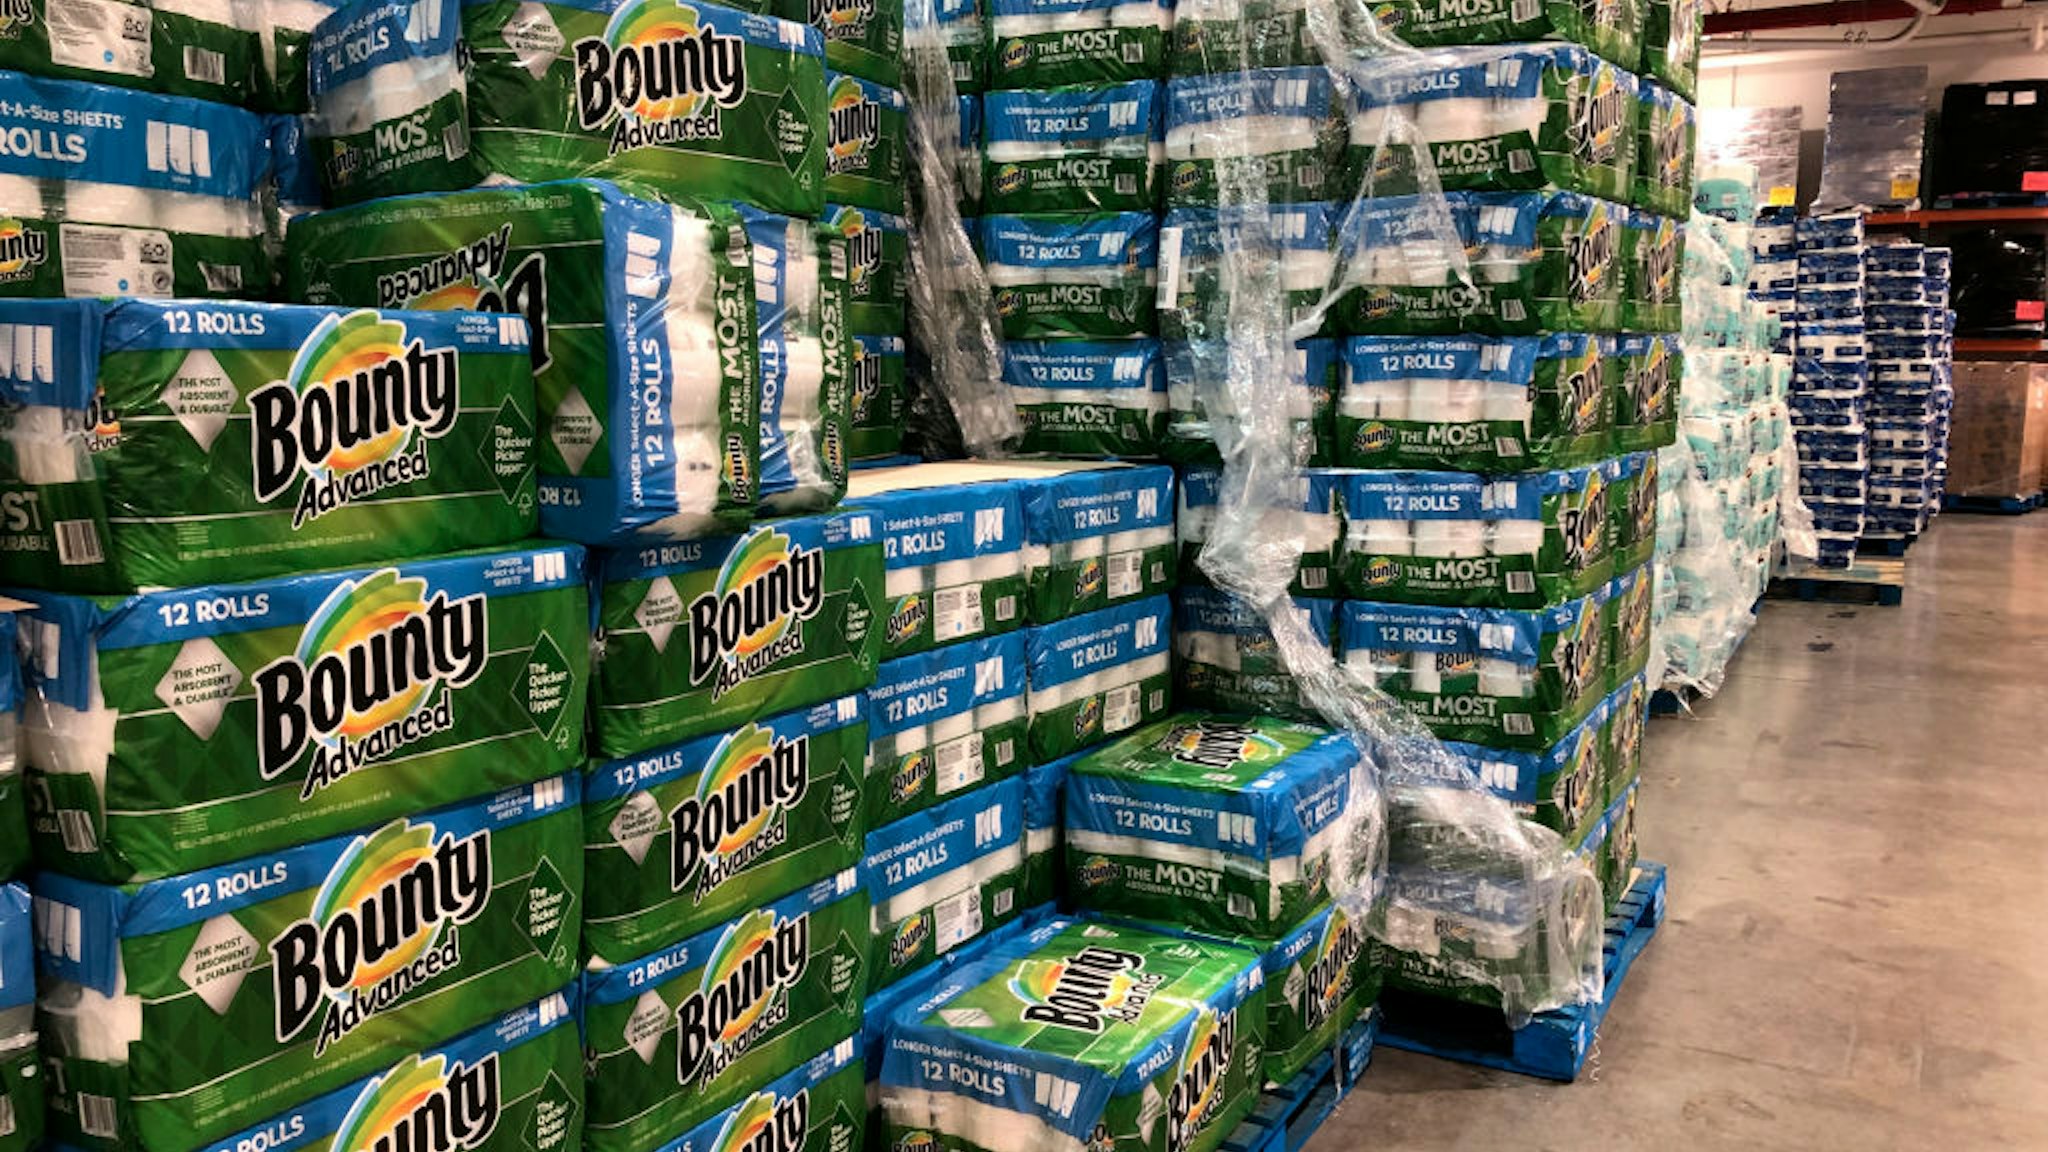 Large stacks of Bounty Paper Towels in Costco Store, Queens, New York. (Photo by: Lindsey Nicholson/UCG/Universal Images Group via Getty Images)